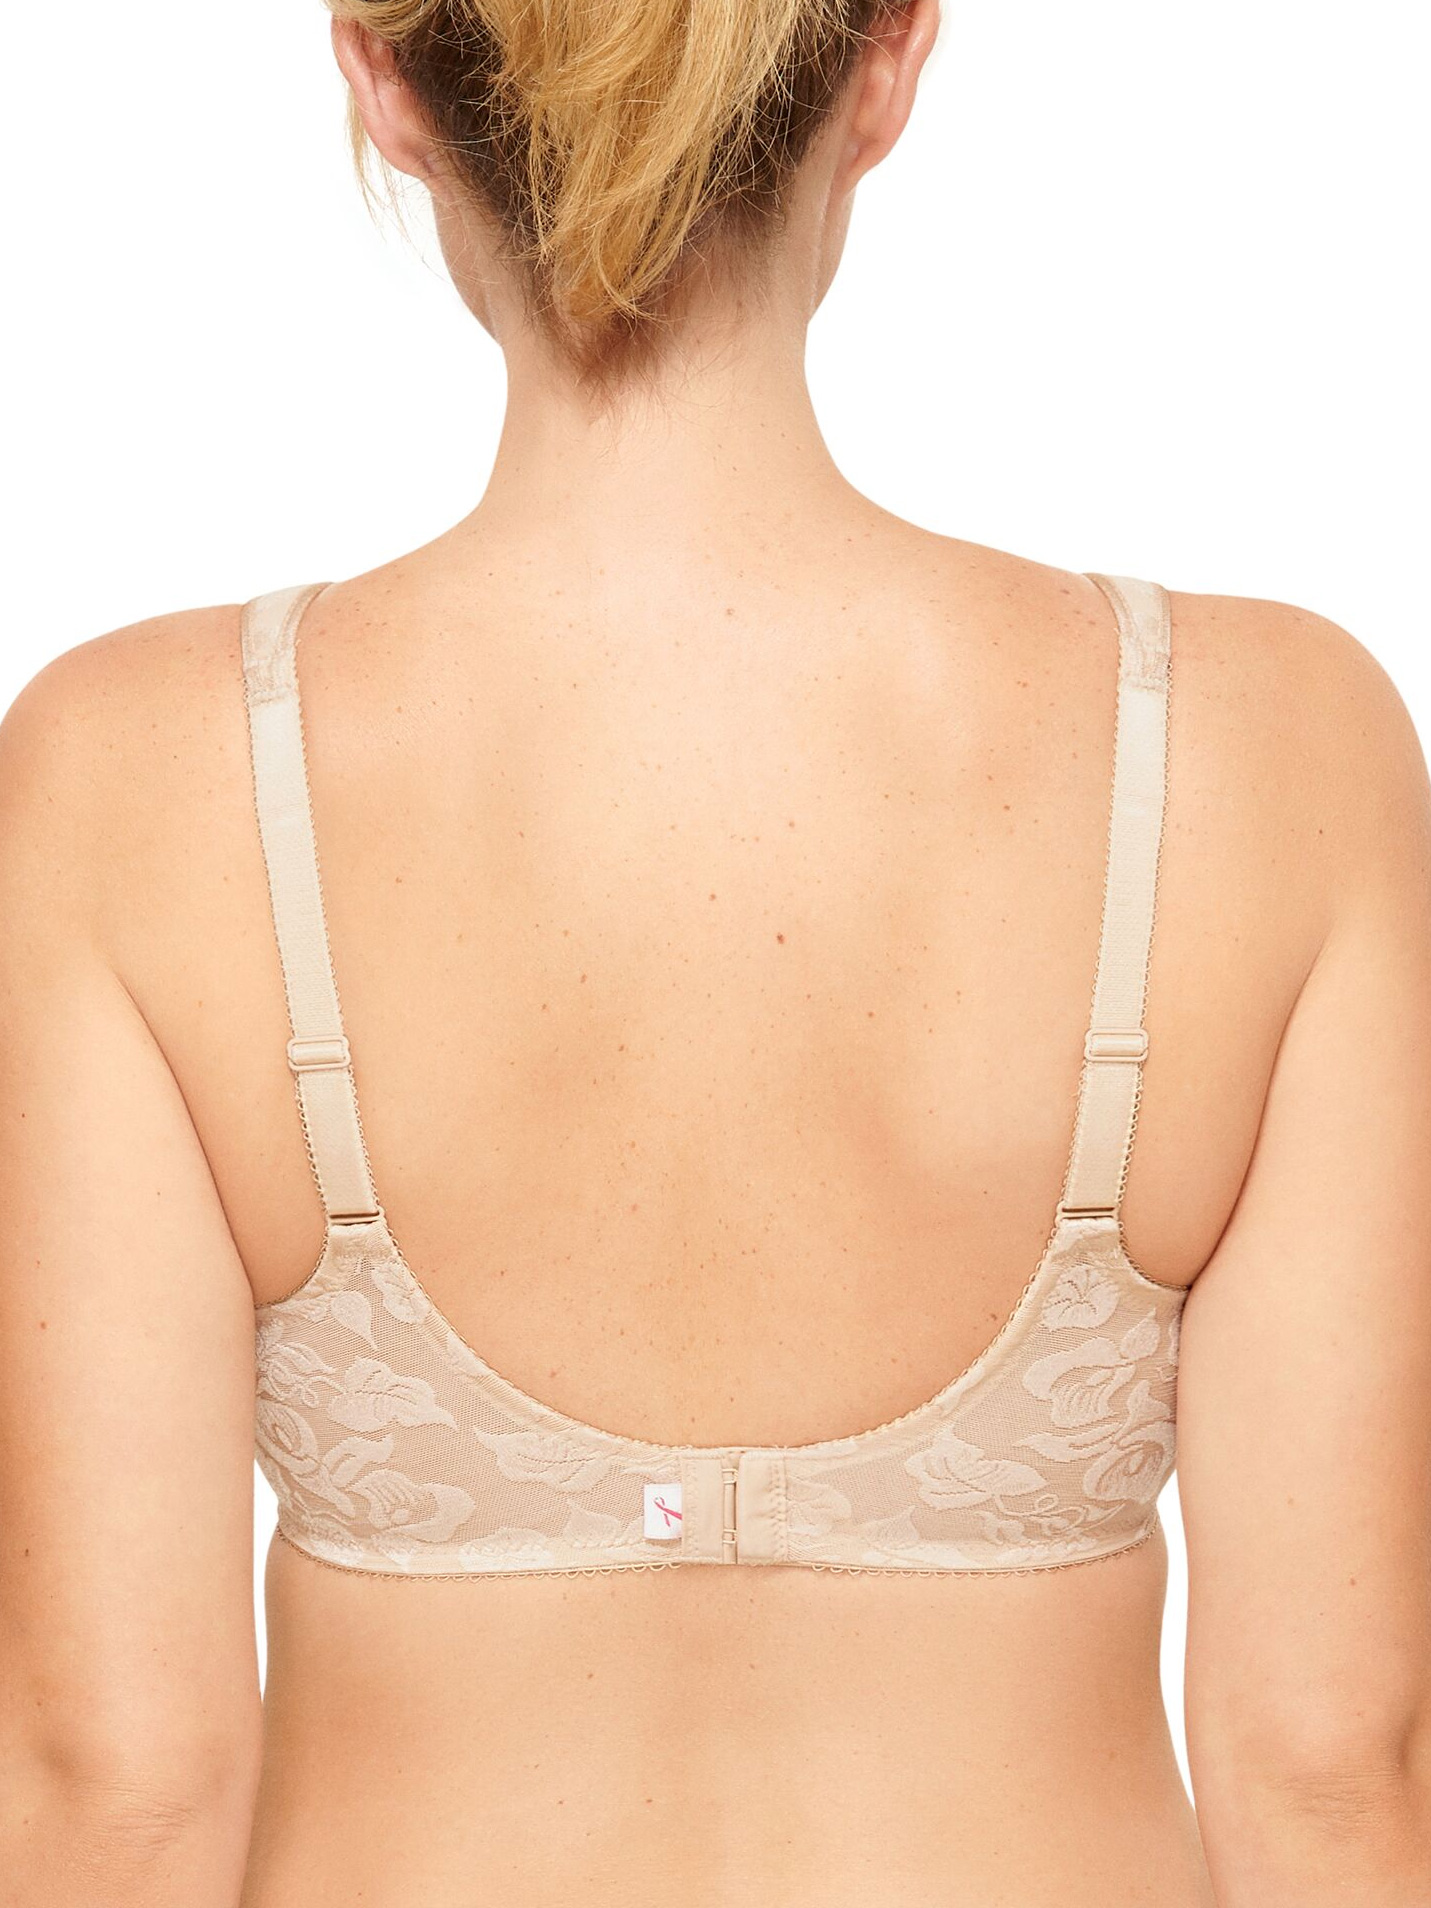 Wacoal 85567 Awareness Full Figure Seamless Underwire Bra 36 G Cappuccino  36g for sale online